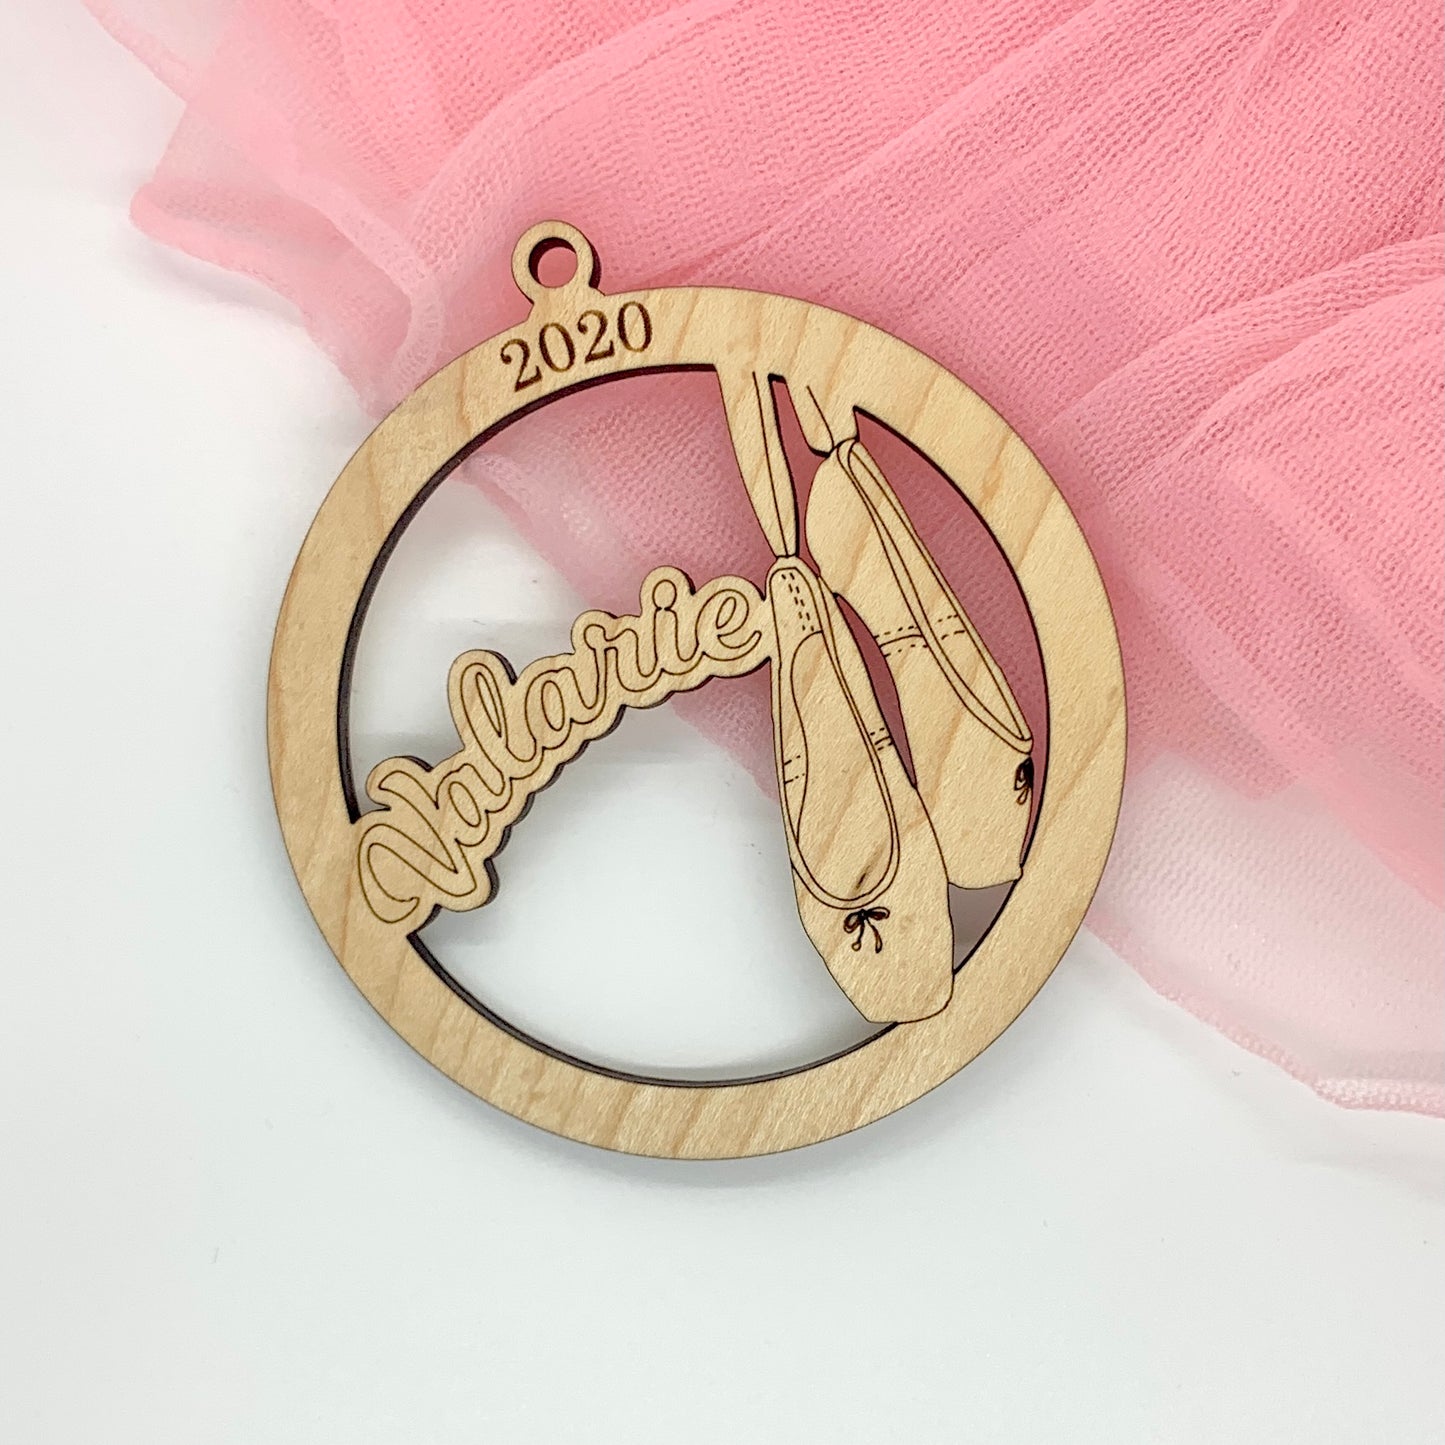 Dance Shoes Ornament - Personalized